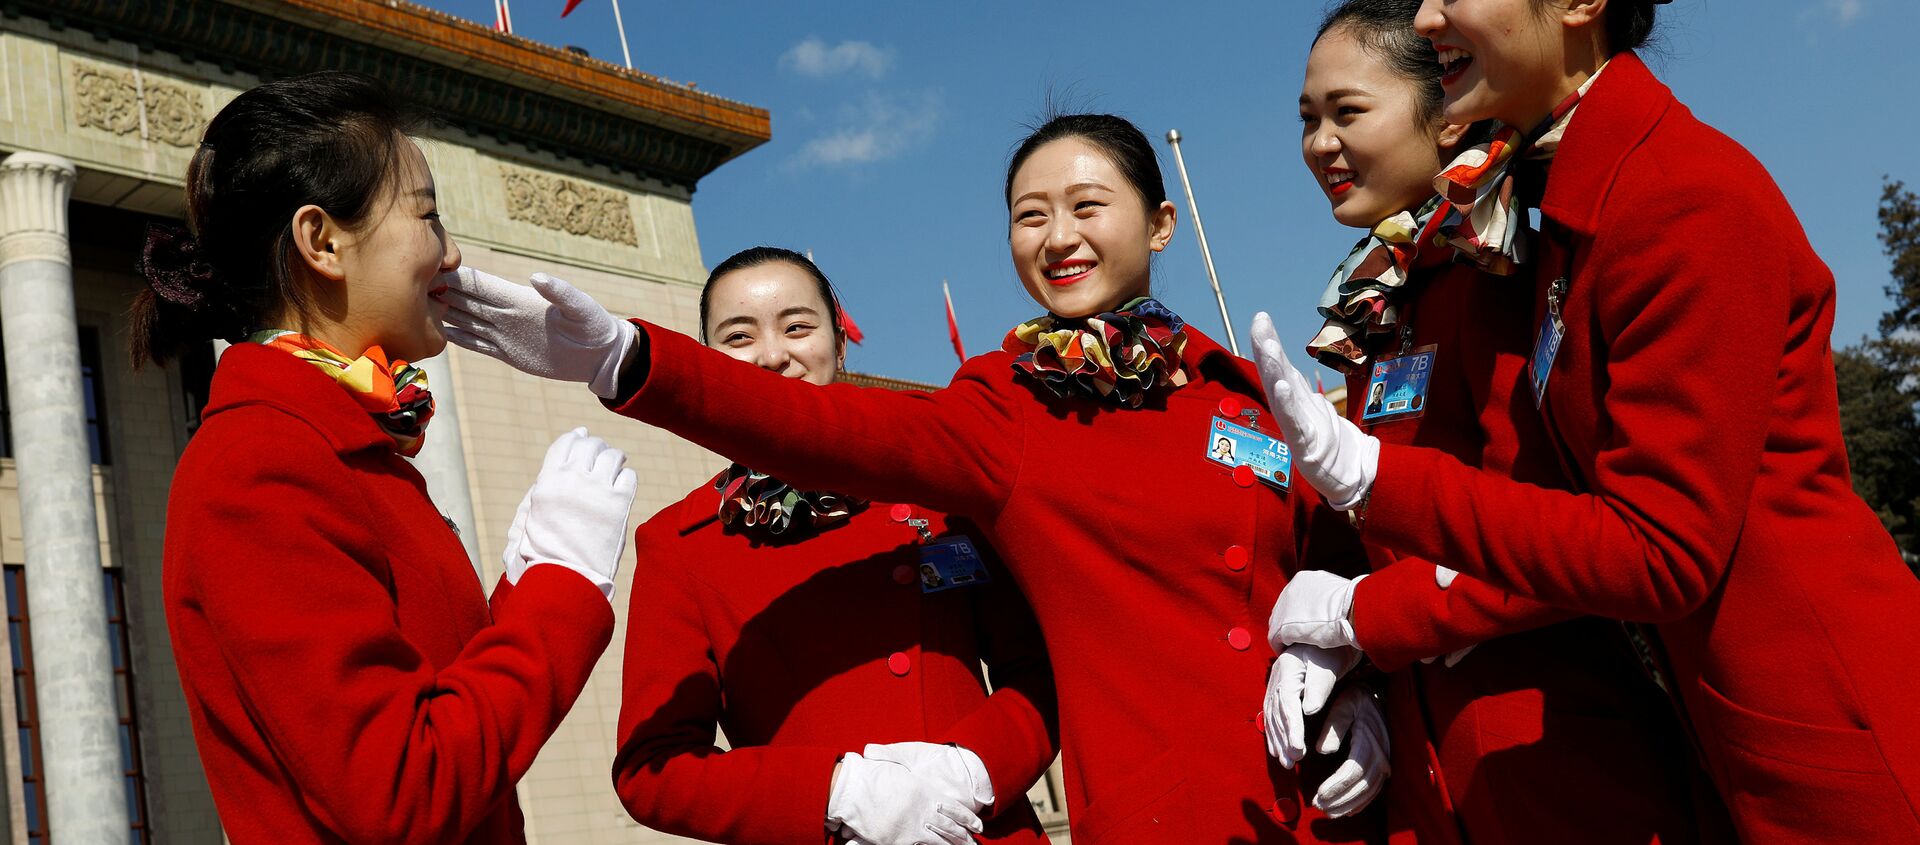 Hotel guides pose for pictures at the Tiananmen Square during the opening session of the National People's Congress (NPC) outside the Great Hall of the People in Beijing, China, March 5, 2017. - اسپوتنیک افغانستان  , 1920, 02.02.2018